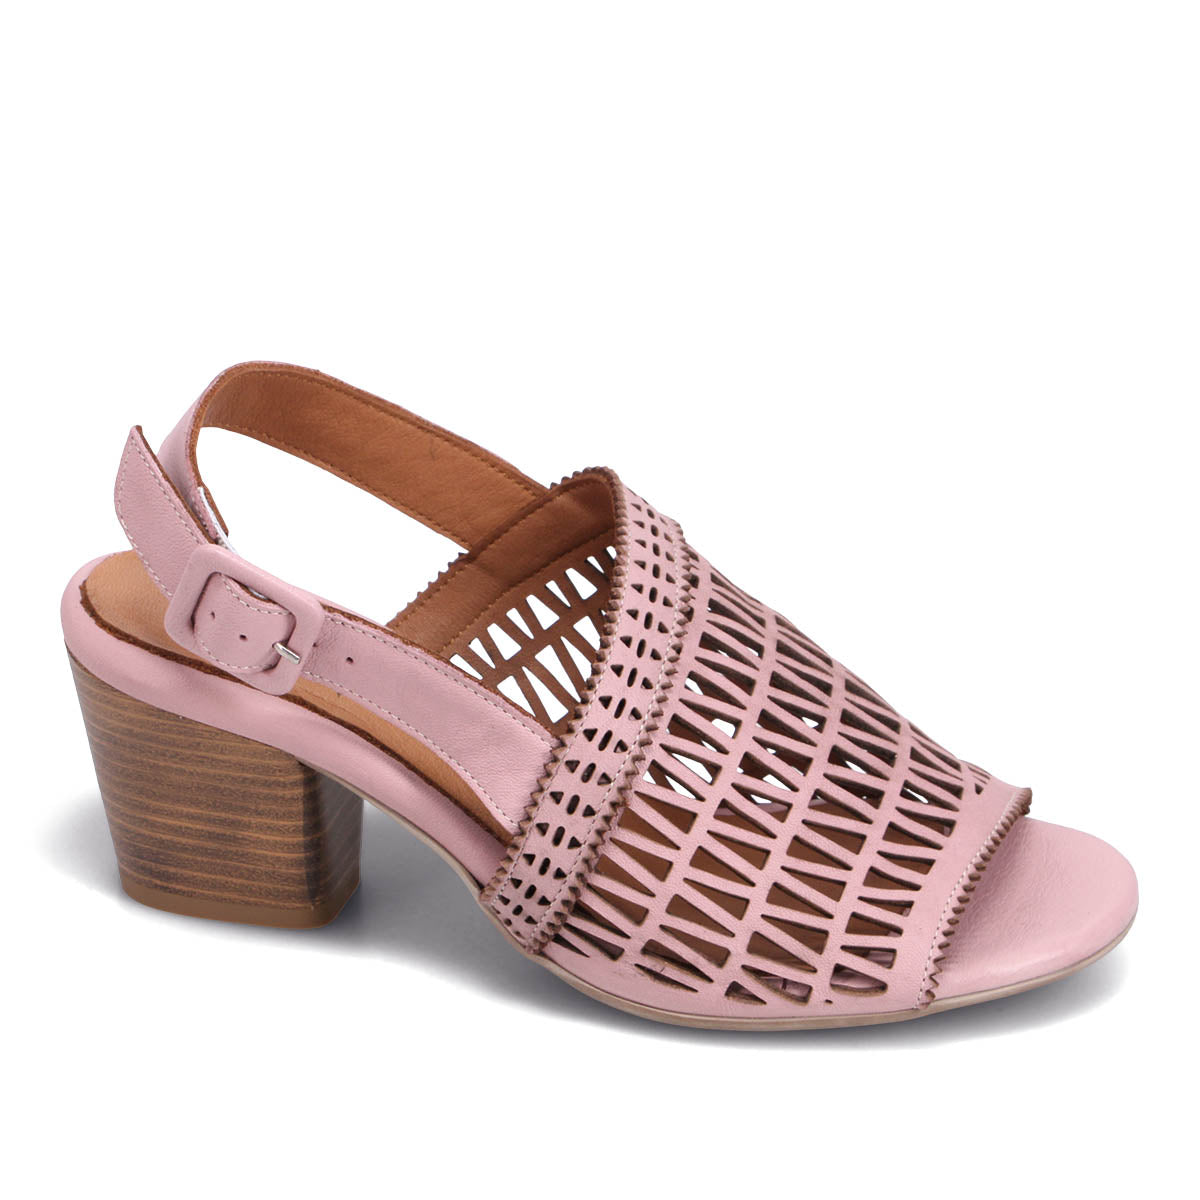 Leather Sandals | Flats, Heels, Mules & More | Bueno – Bueno Shoes